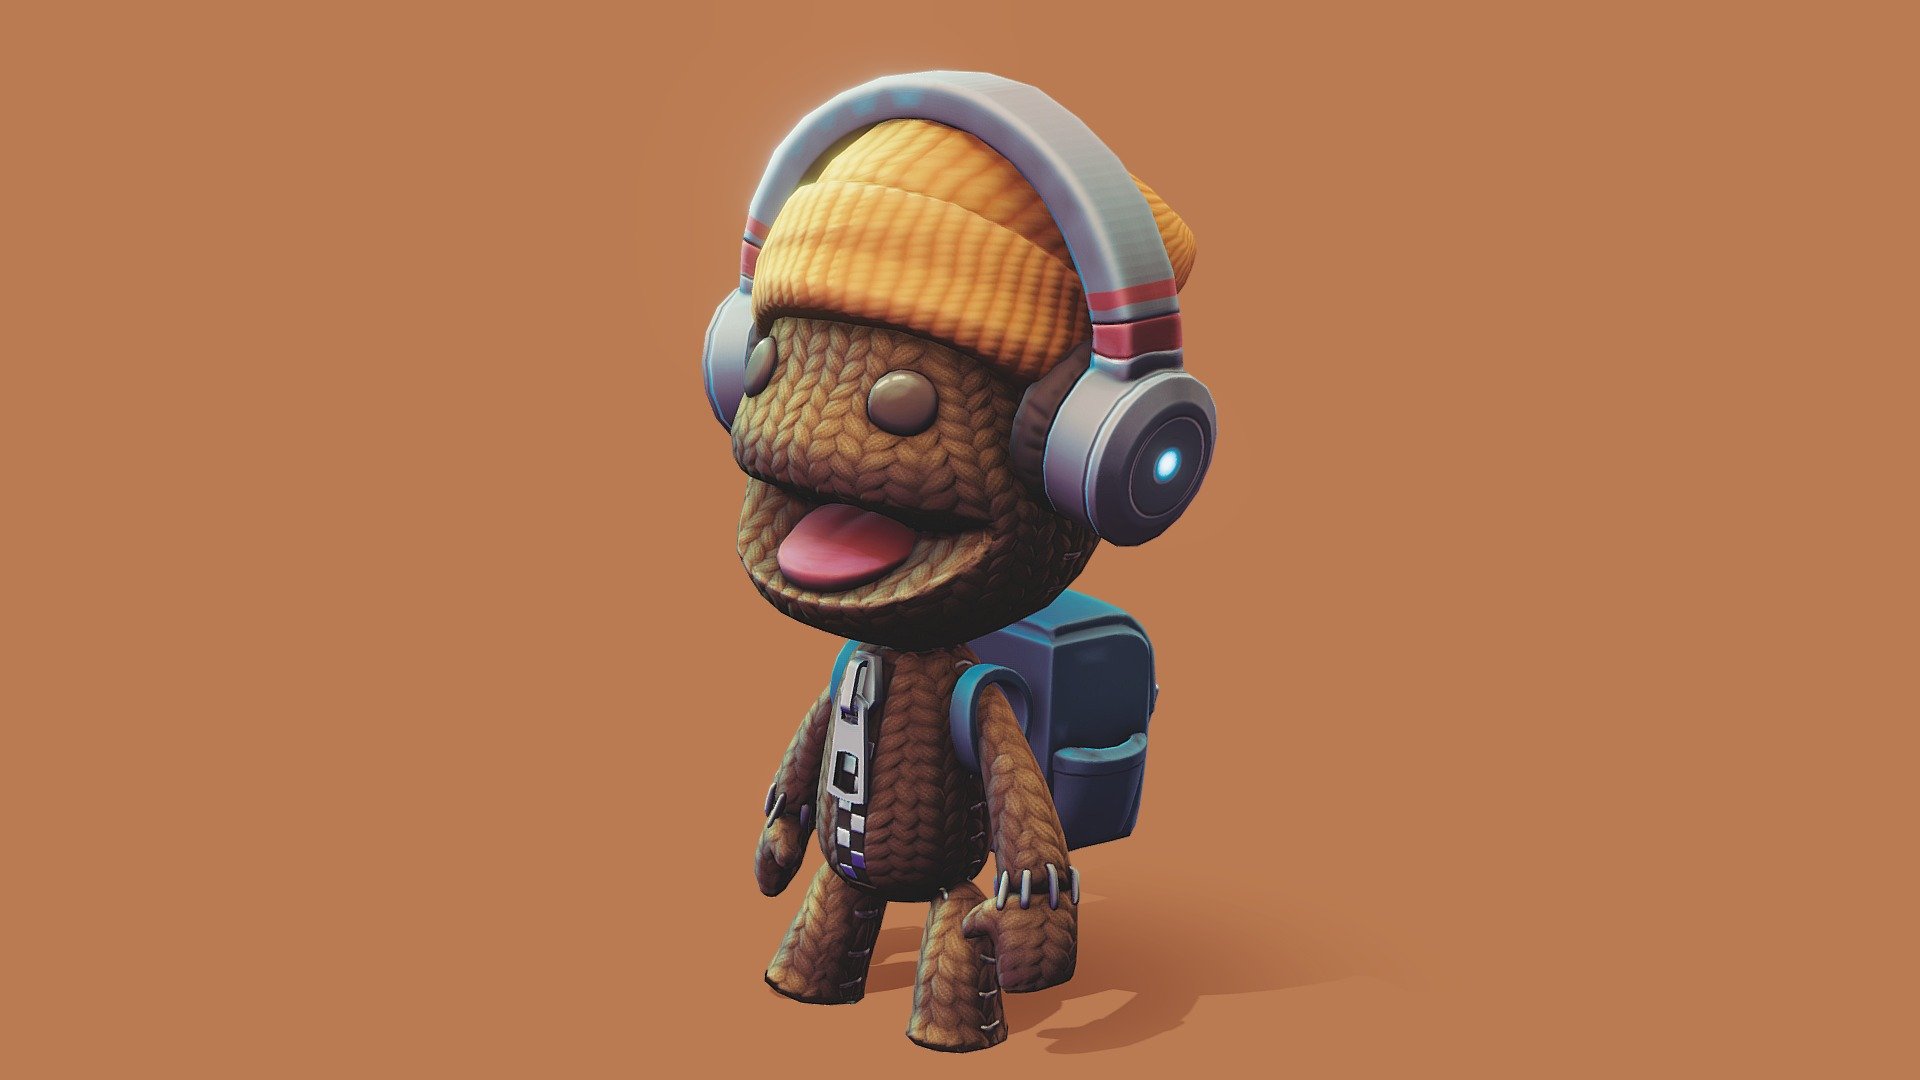 Fan art of Sackboy from little big planet. One of my favoured games as a child growing up. I gave him a little bit of my own art style. 
made in Zbrush and retopo in maya. 
I used this substance material from substance share : https://share.substance3d.com/libraries/5526 - Sackboiiiiii - Little big planet Fan art - 3D model by hugo colauto (@hugocolauto) 3d model